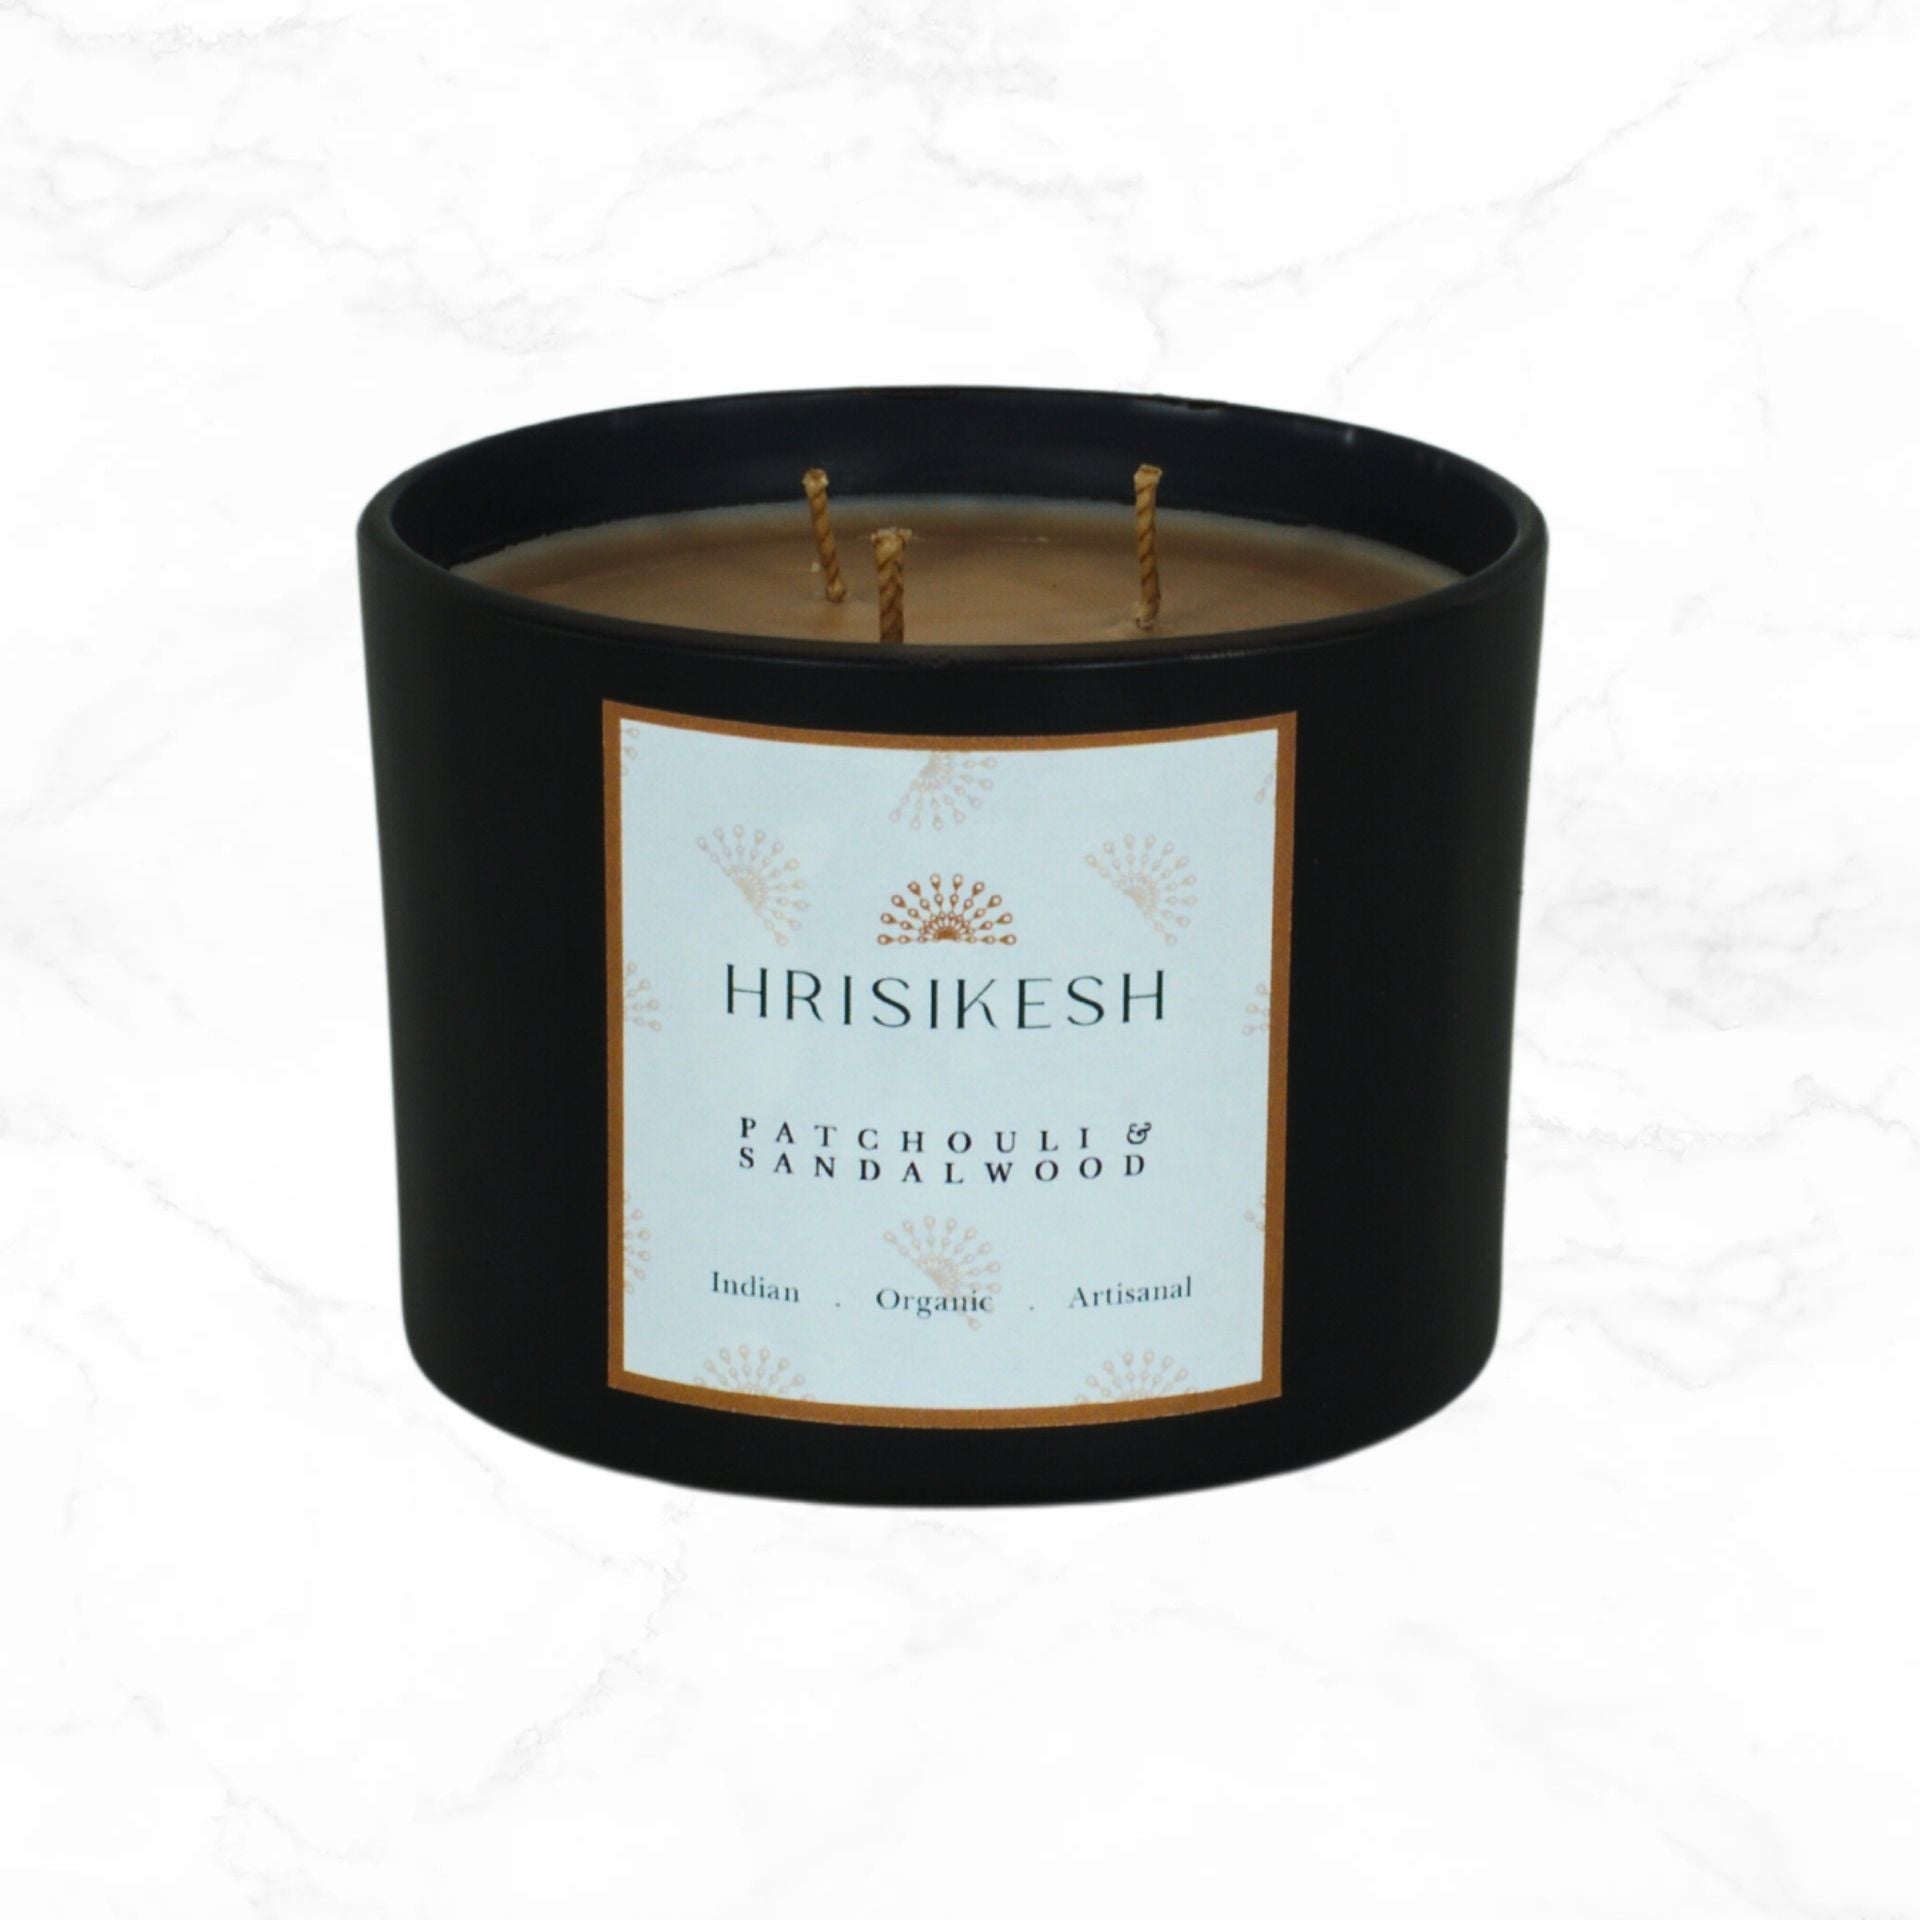 Sandalwood & Patchouli Scented Candles